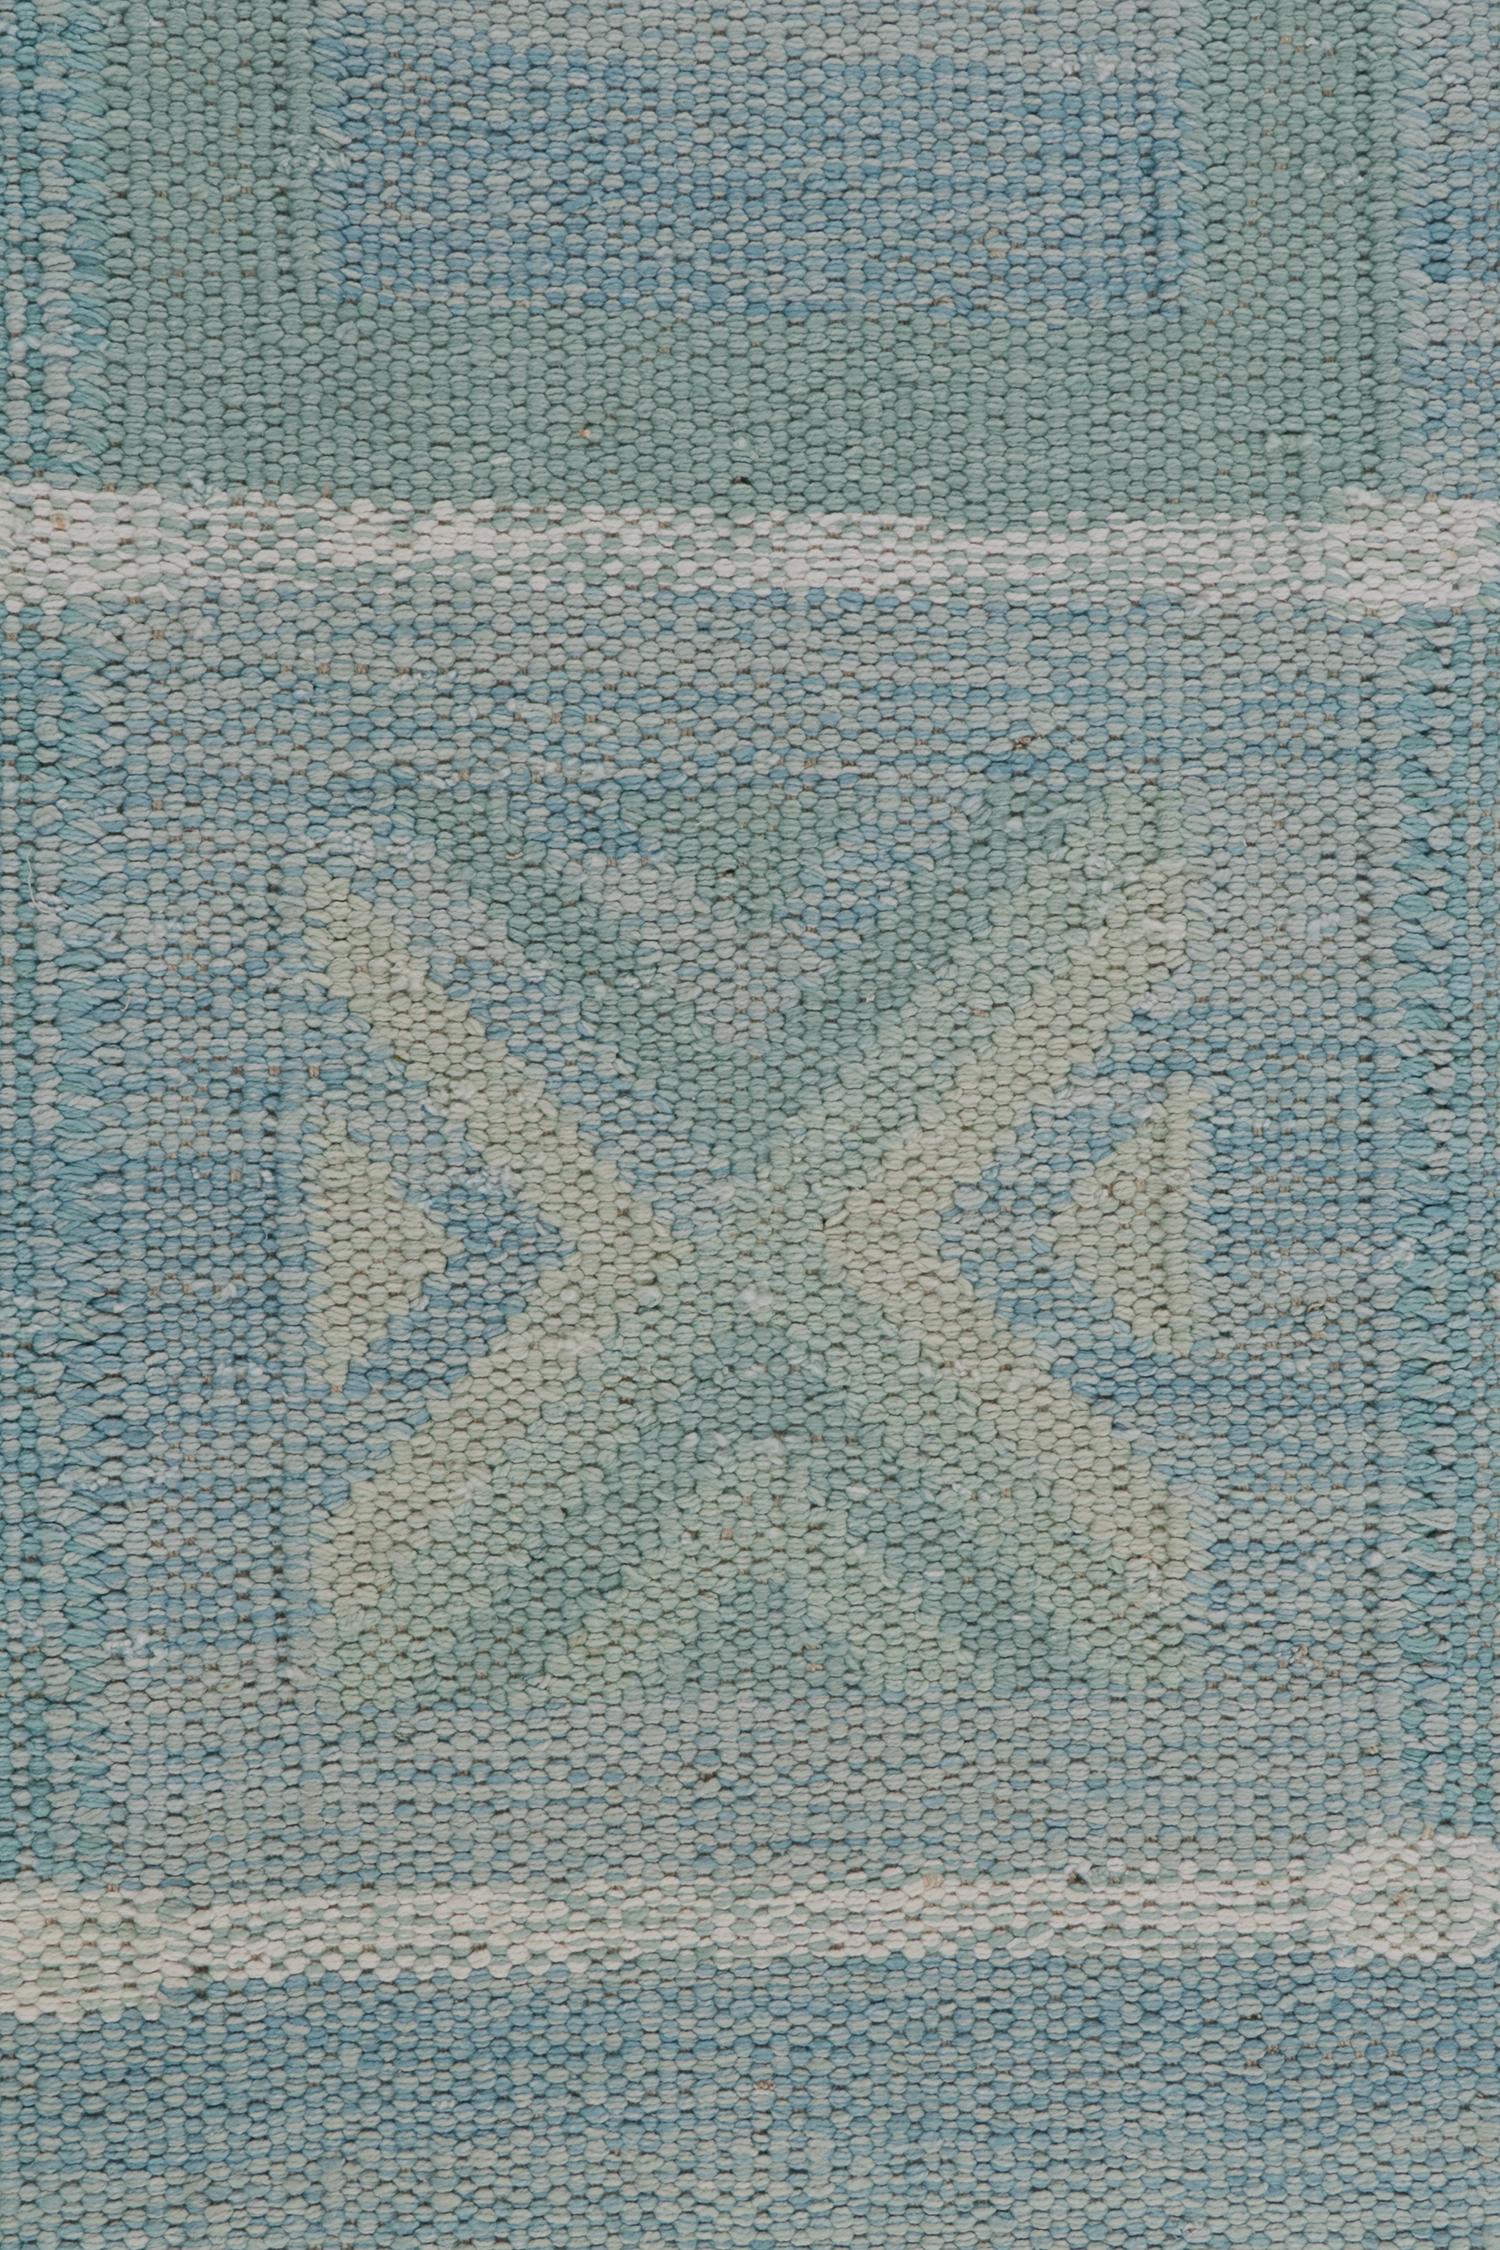 Rug & Kilim’s Scandinavian Style Kilim in Seafoam, Teal & Gray Geometric Pattern In New Condition For Sale In Long Island City, NY